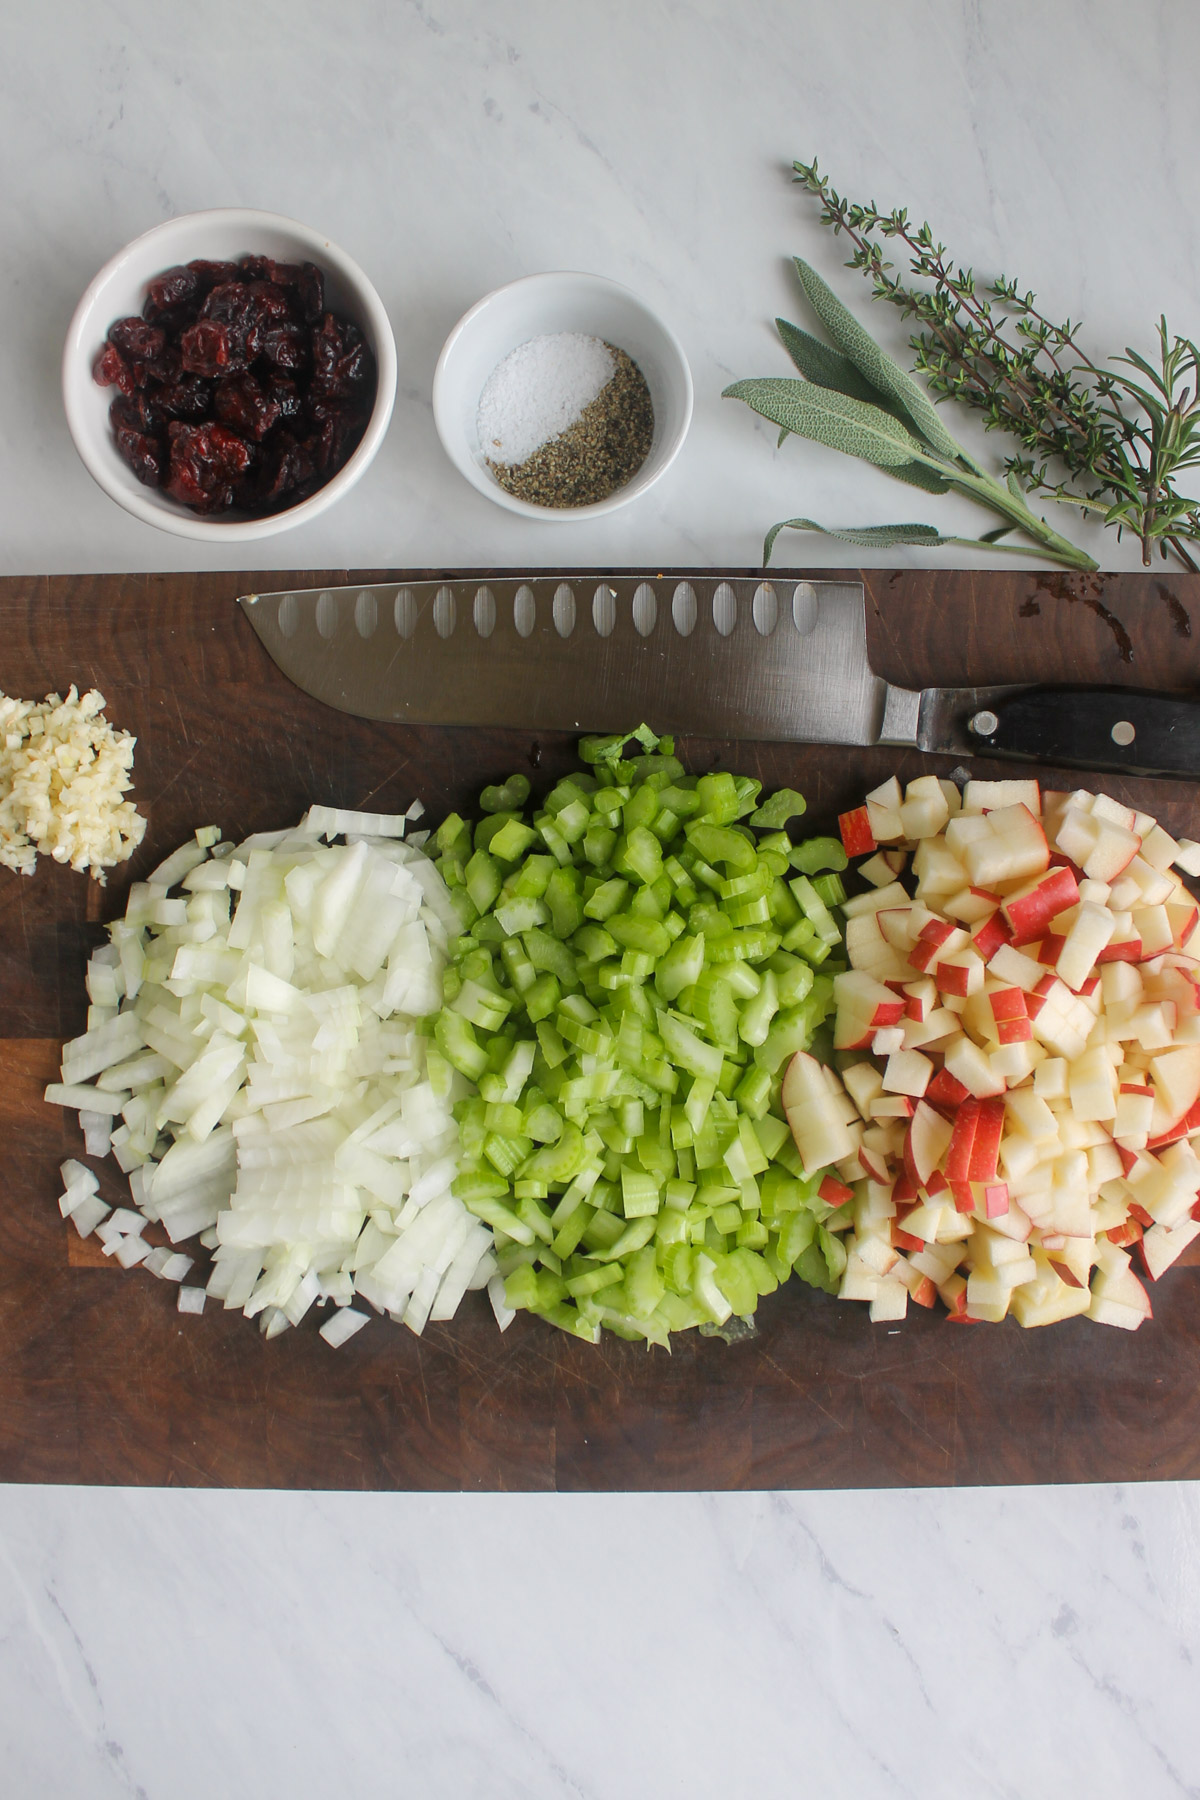 Chopped onion, celery, apple and garlic on a cutting board with a knife and other ingredients.